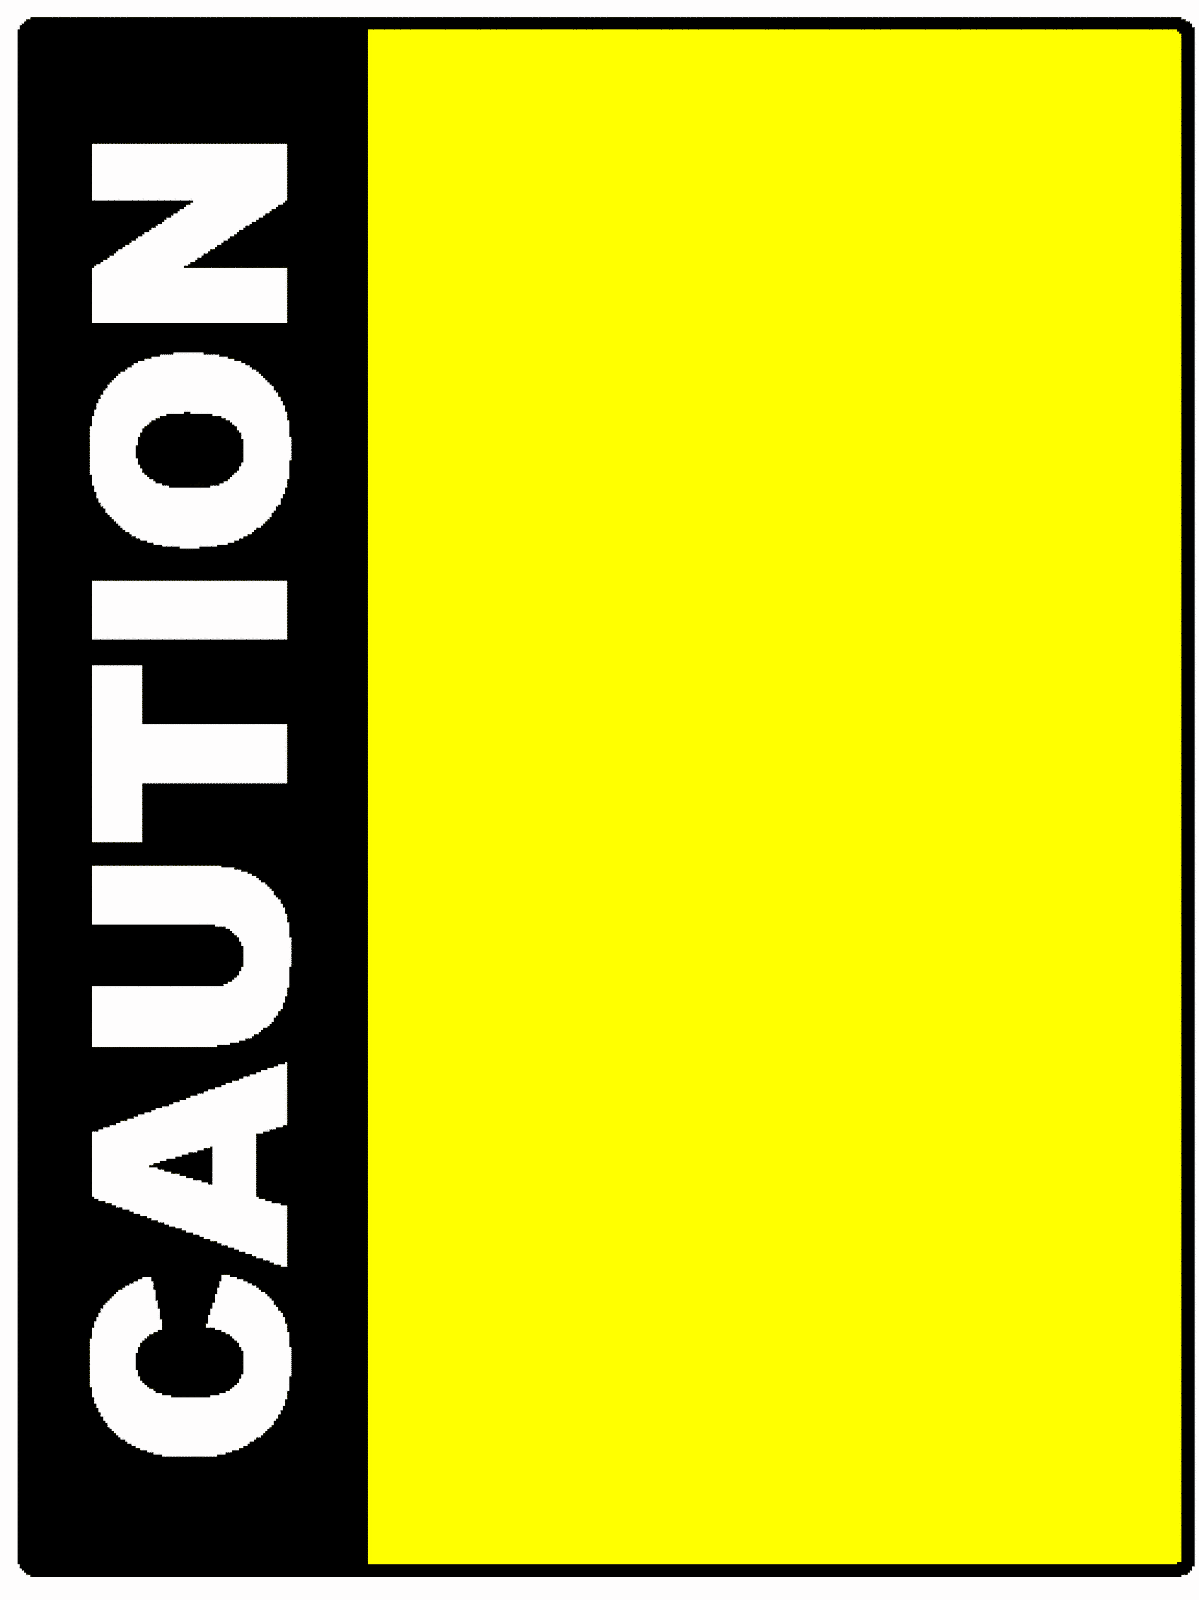 Caution Tape Powerpoint Template Free